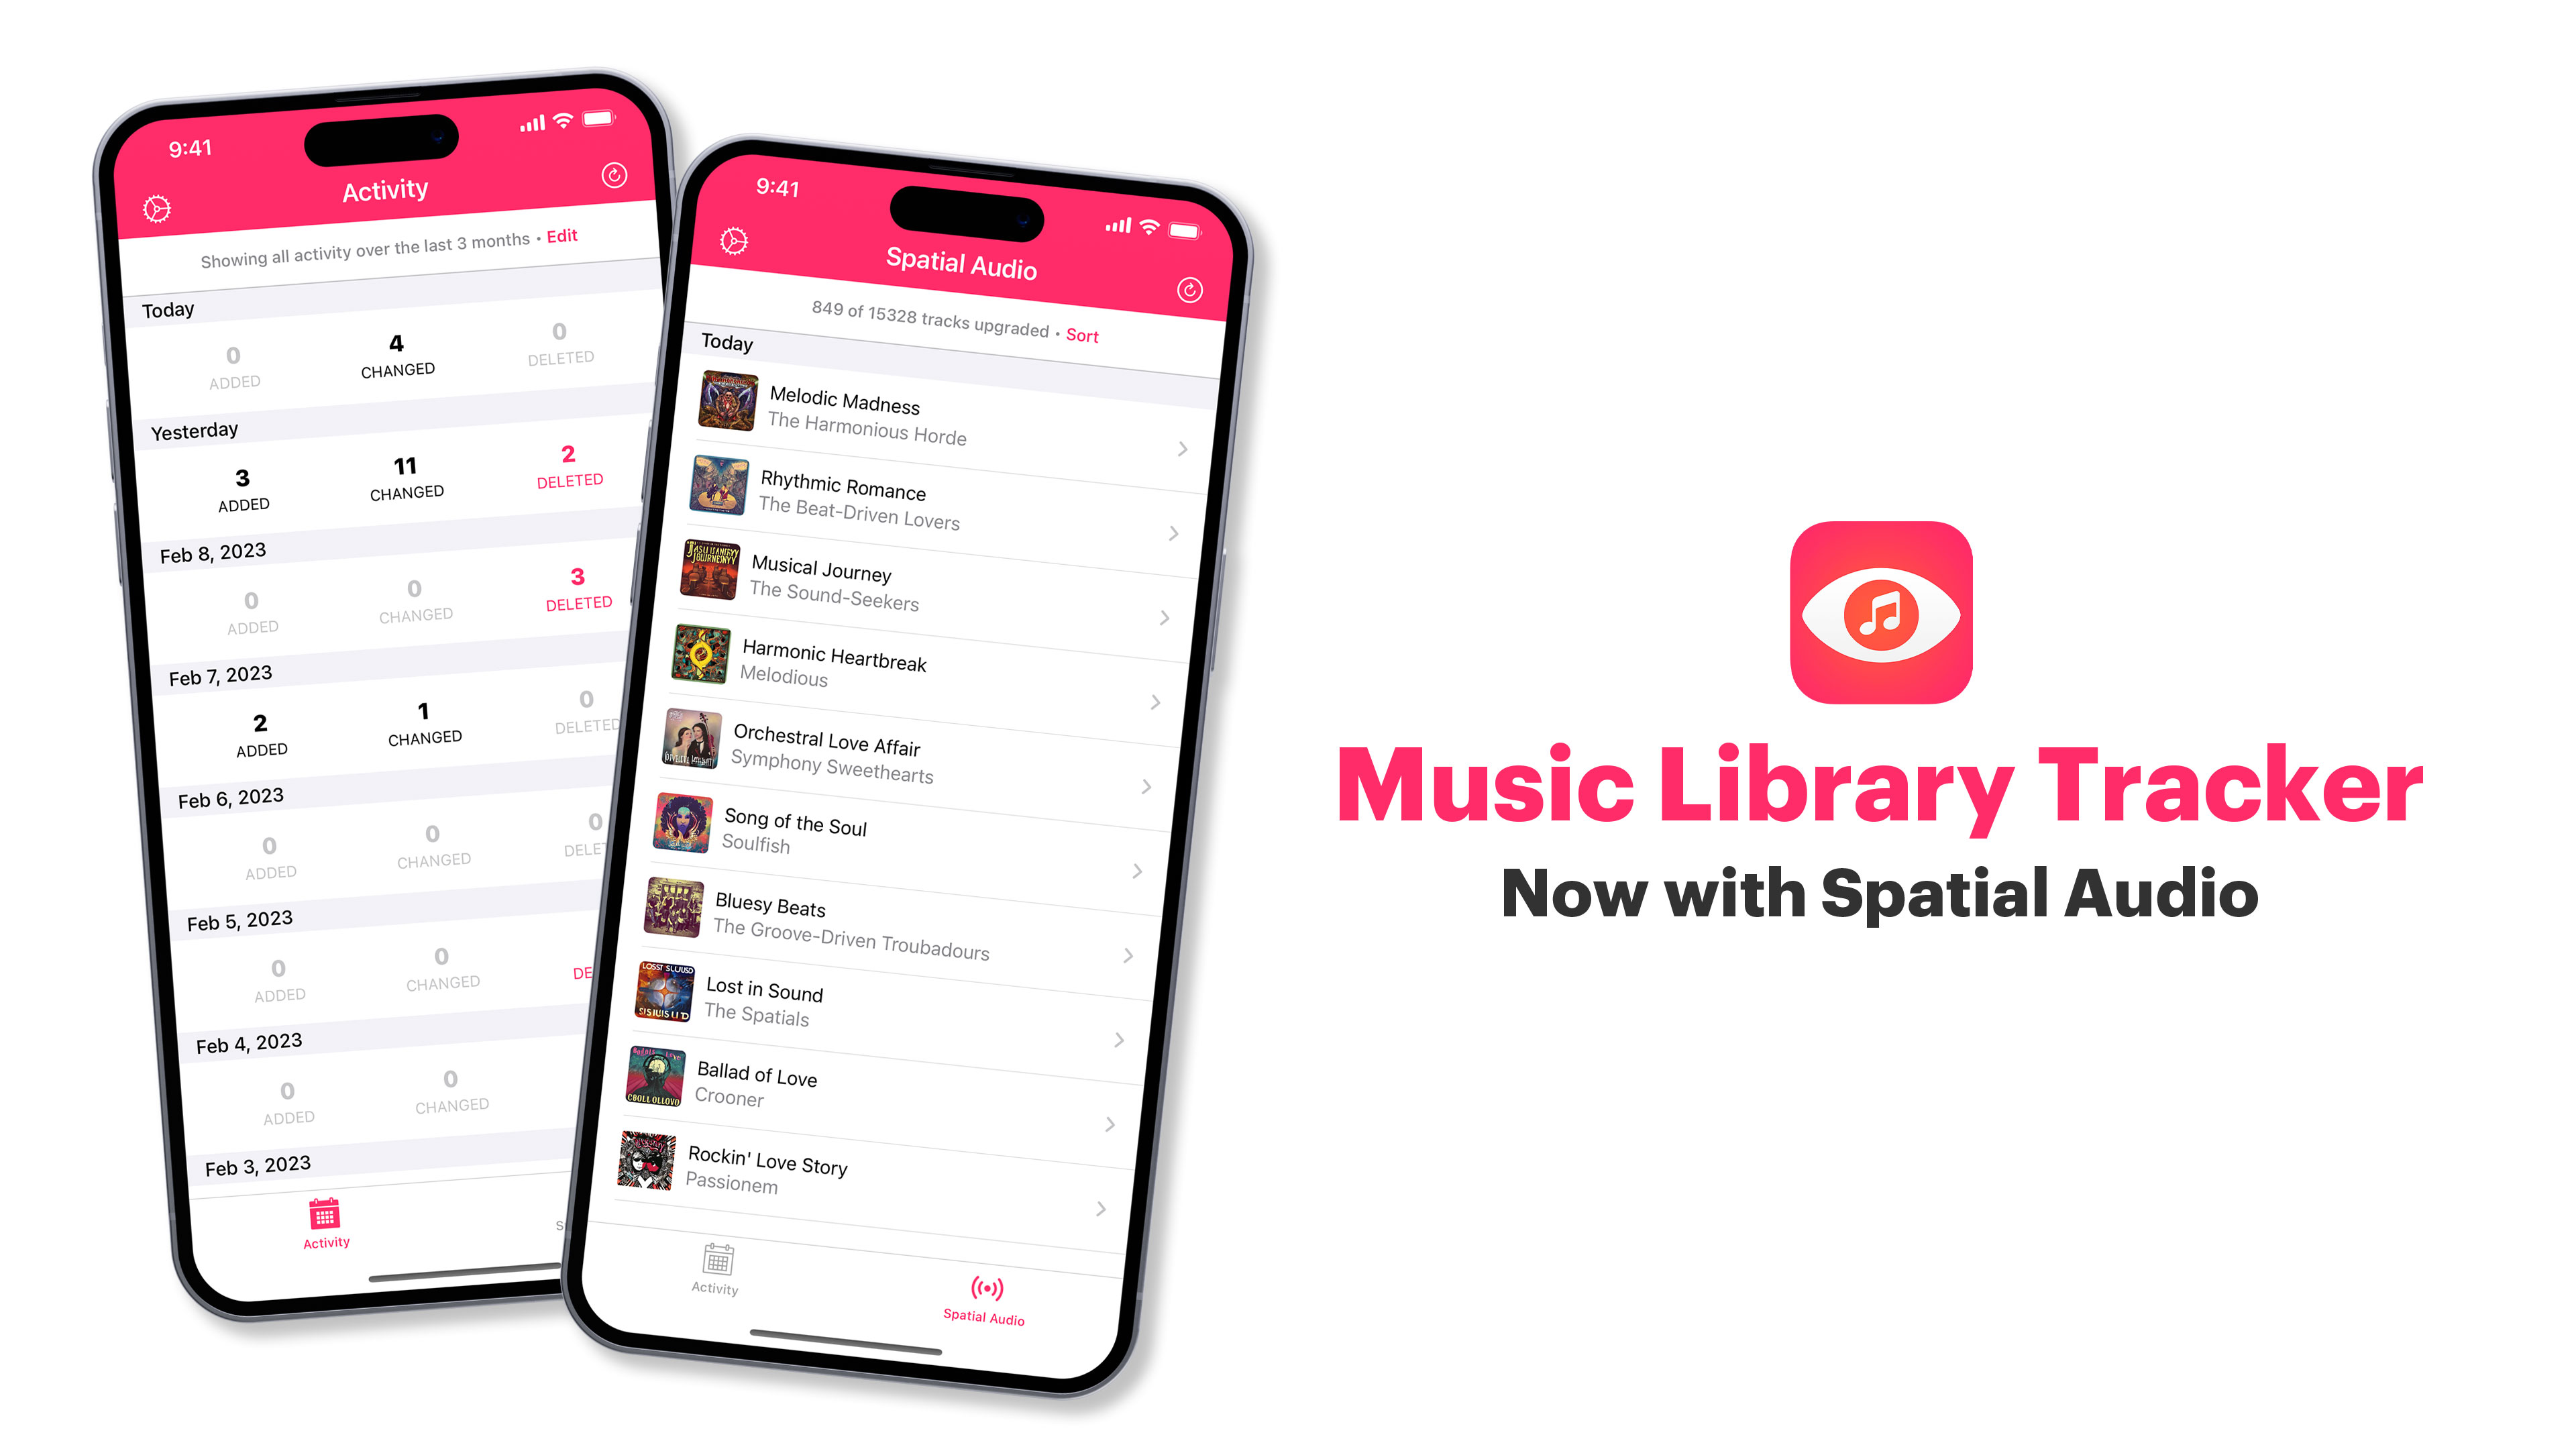 Music Library Tracker, now with Spatial Audio